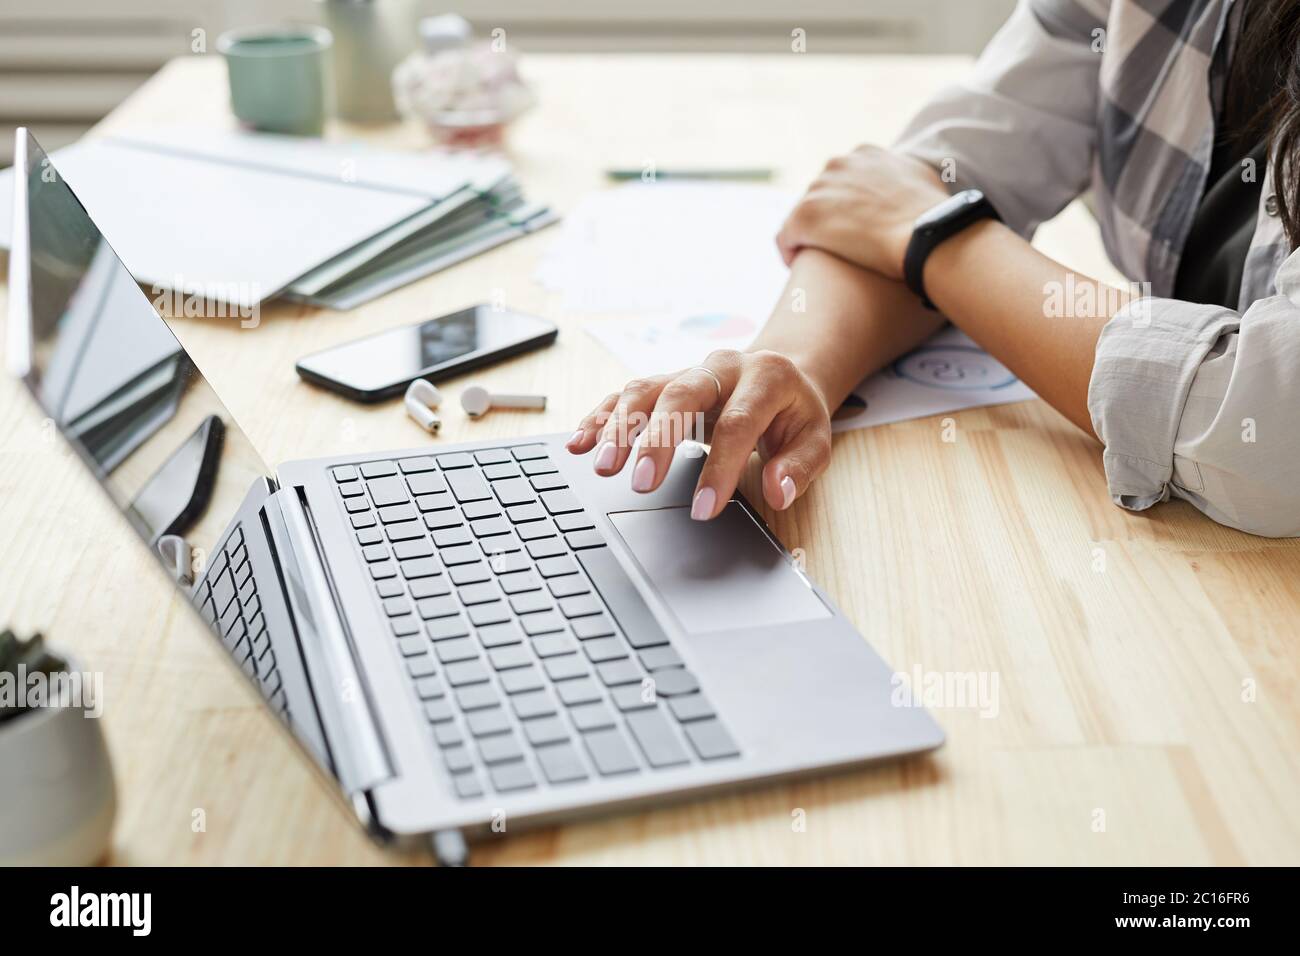 Close up of young mixed-race woman using laptop while working at home office, hands typing on keyboard, copy space Stock Photo